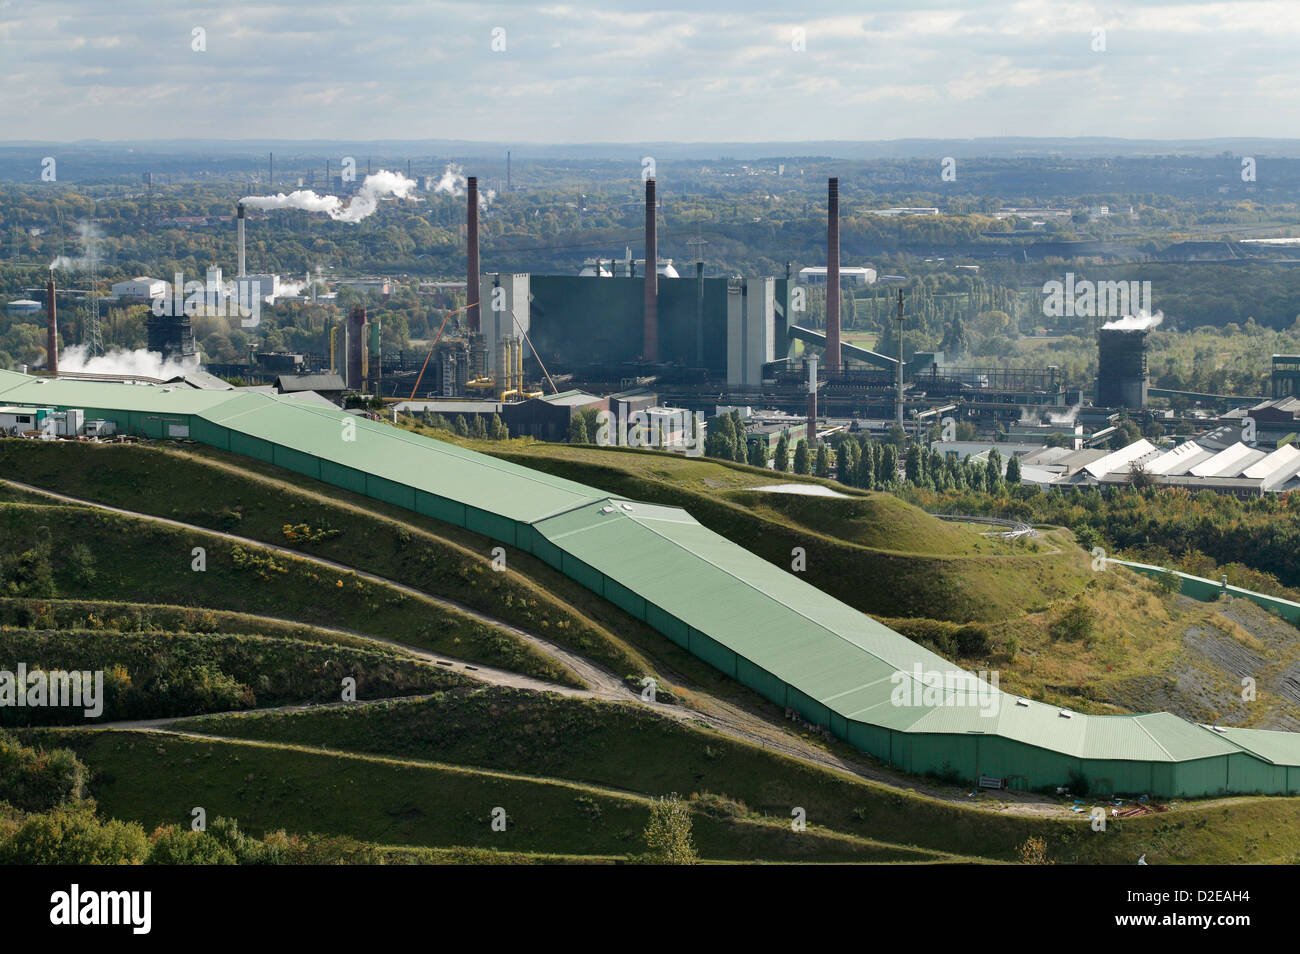 Bottrop, of Germany, and views of the Alpin Center Bottrop and the Prosper coke Stock Photo